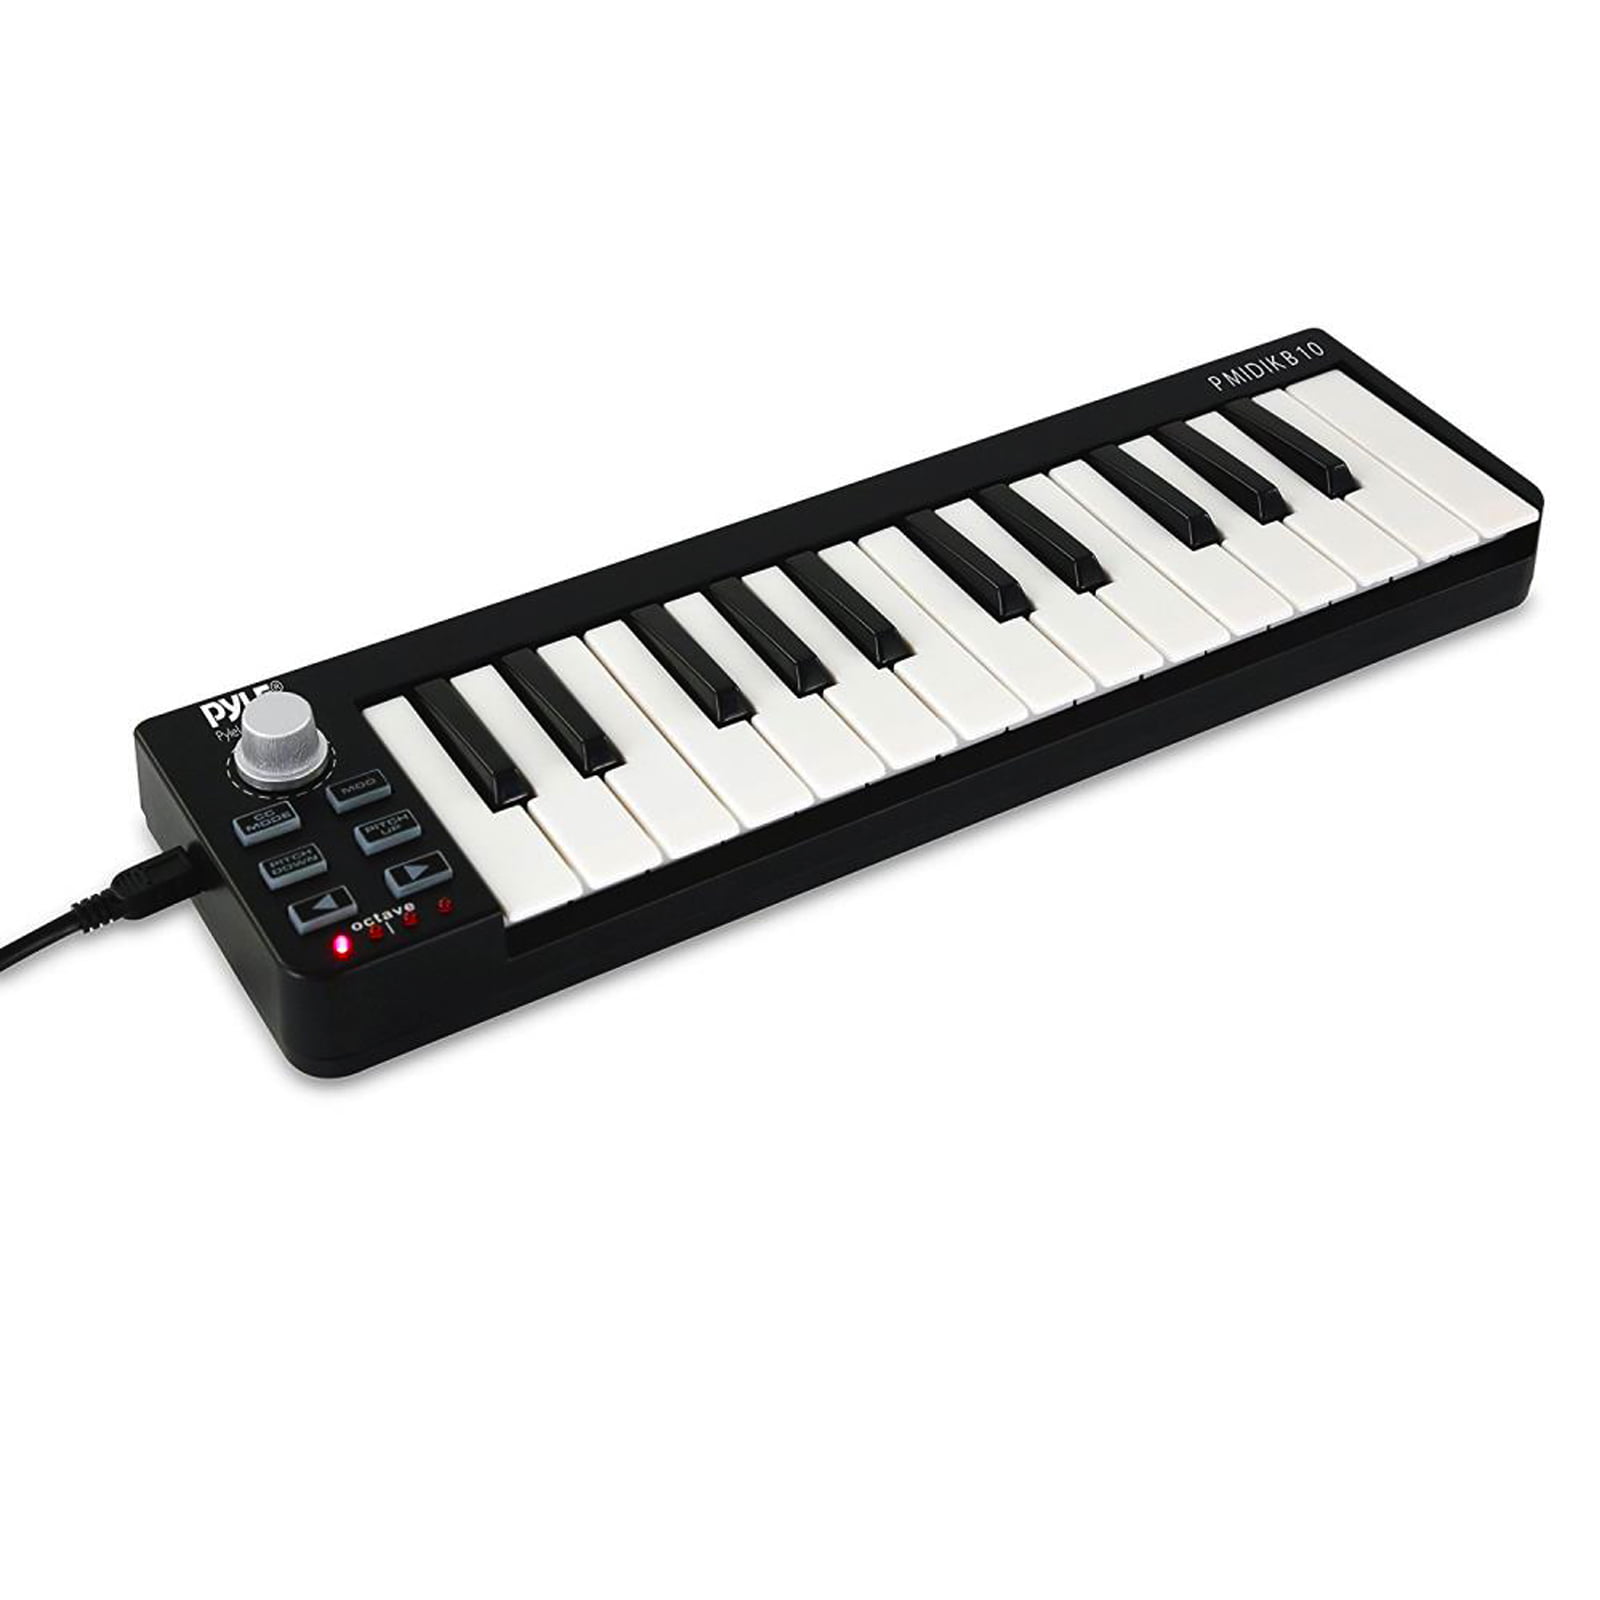 koepel Verwijdering vergroting Pyle Mini USB MIDI Controller Keyboard - 25 Key Portable Audio Recording  Workstation Equipment - Hardware Buttons Control any DAW Software for  personal computer Computer Electronic Music Production - Walmart.com